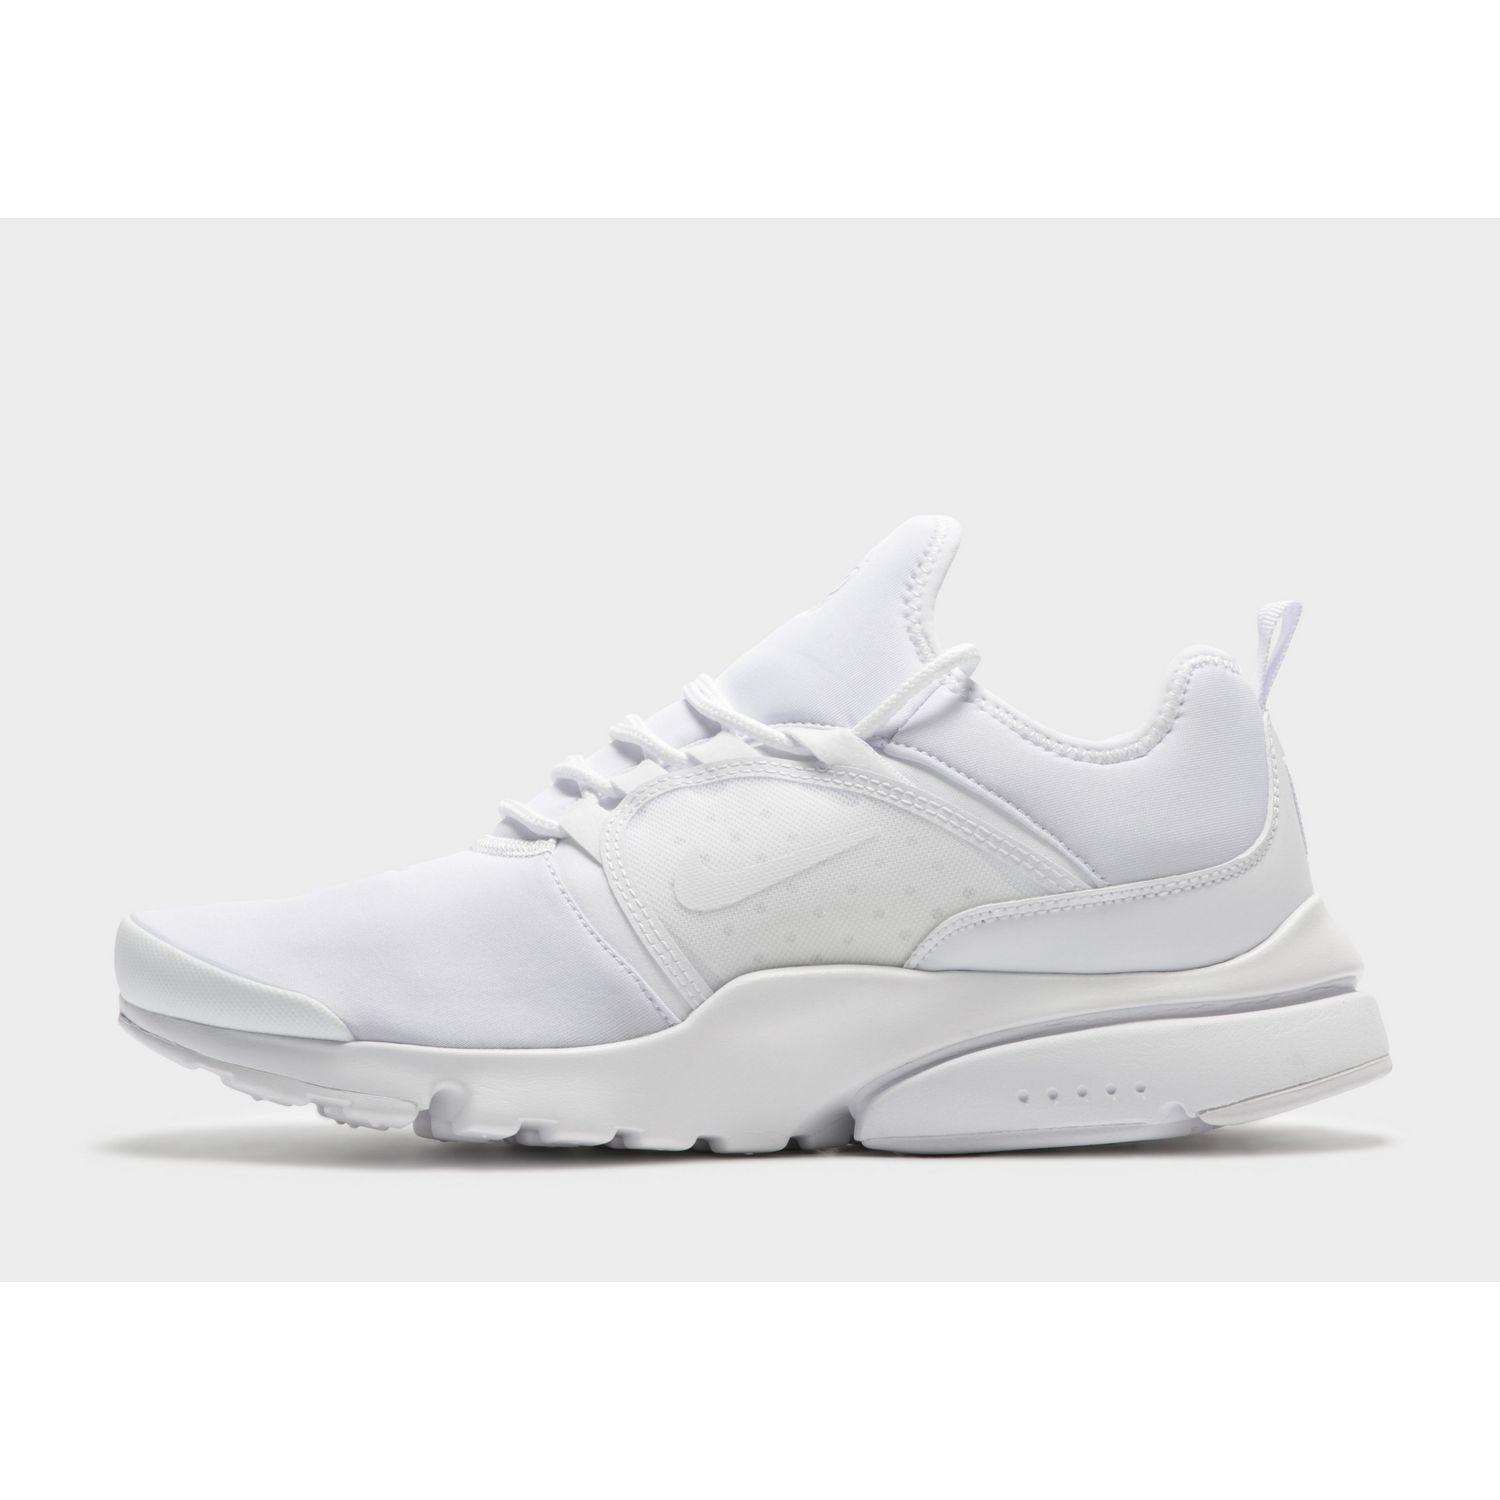 Nike Synthetic Air Presto Fly World in White for Men - Lyst